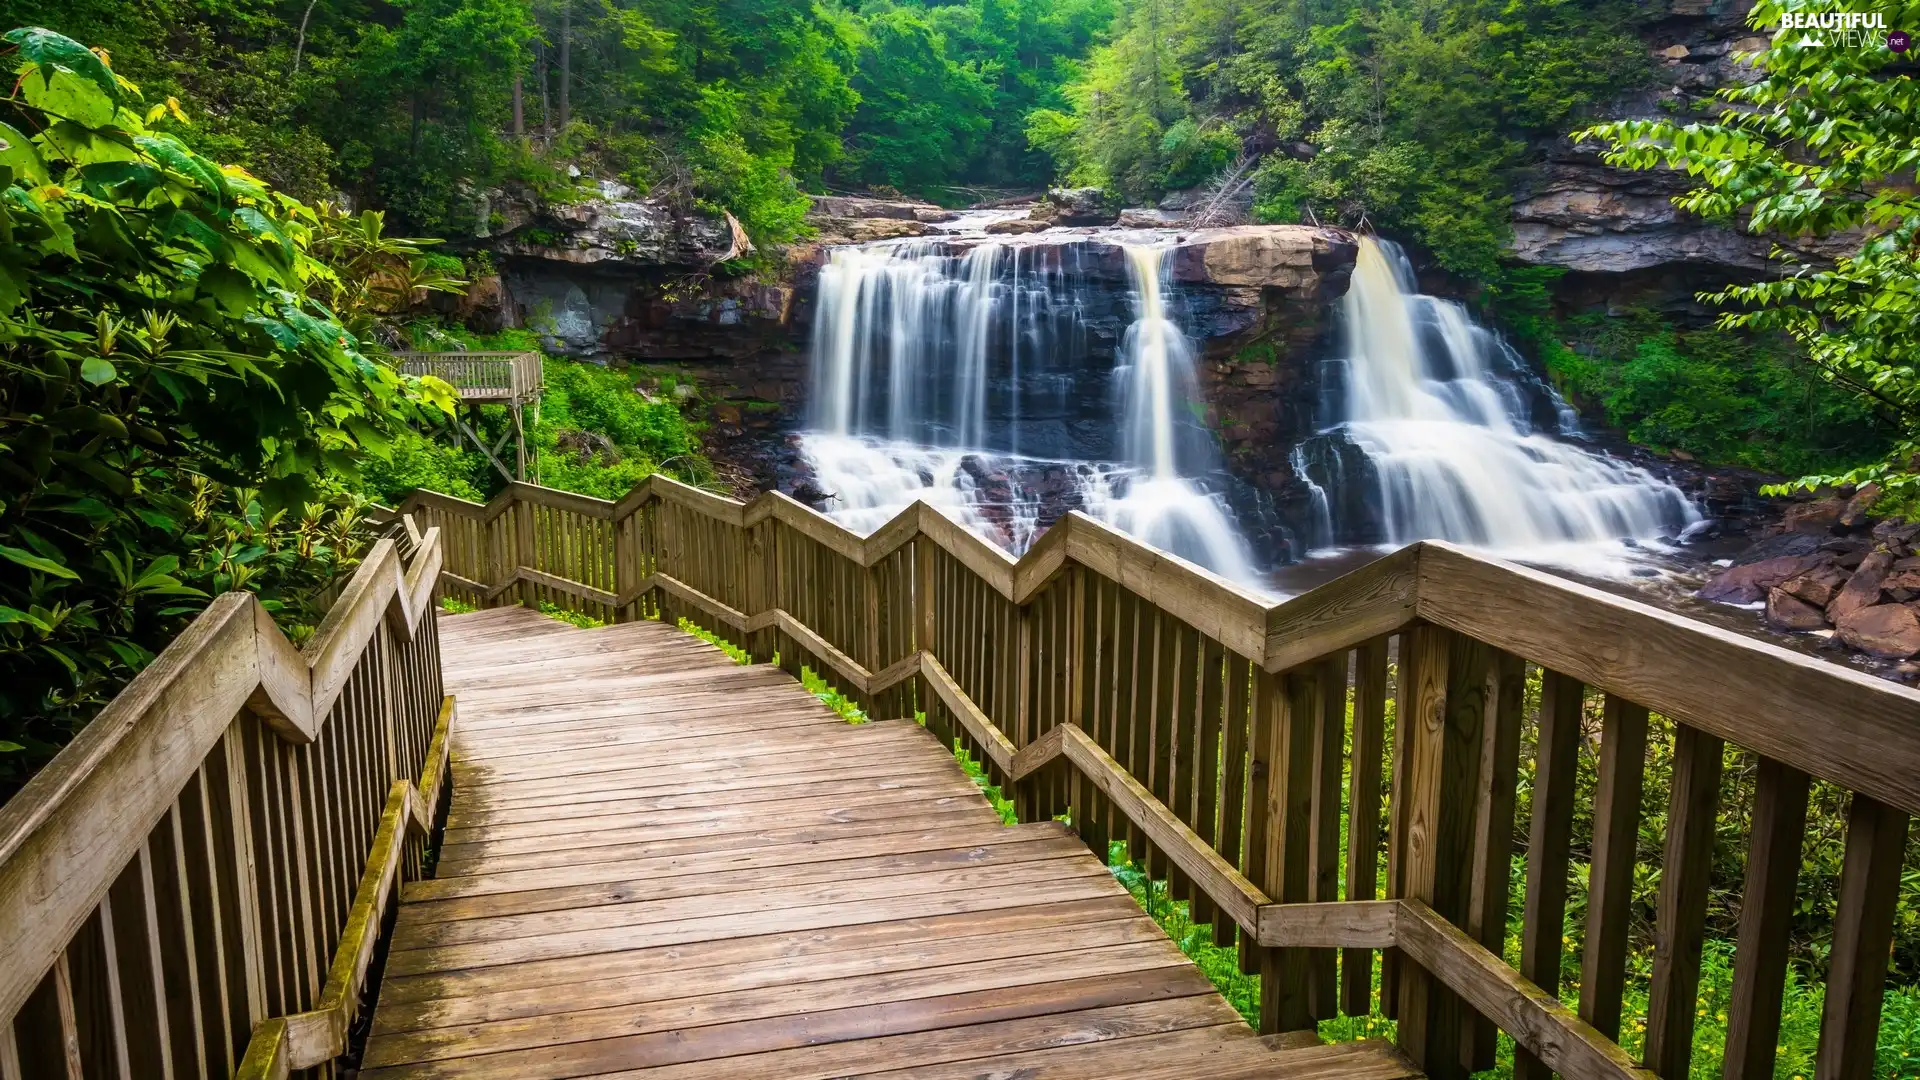 Blackwater Falls State Park, Blackwater Falls, Stairs, forest, viewes, West Virginia, The United States, trees